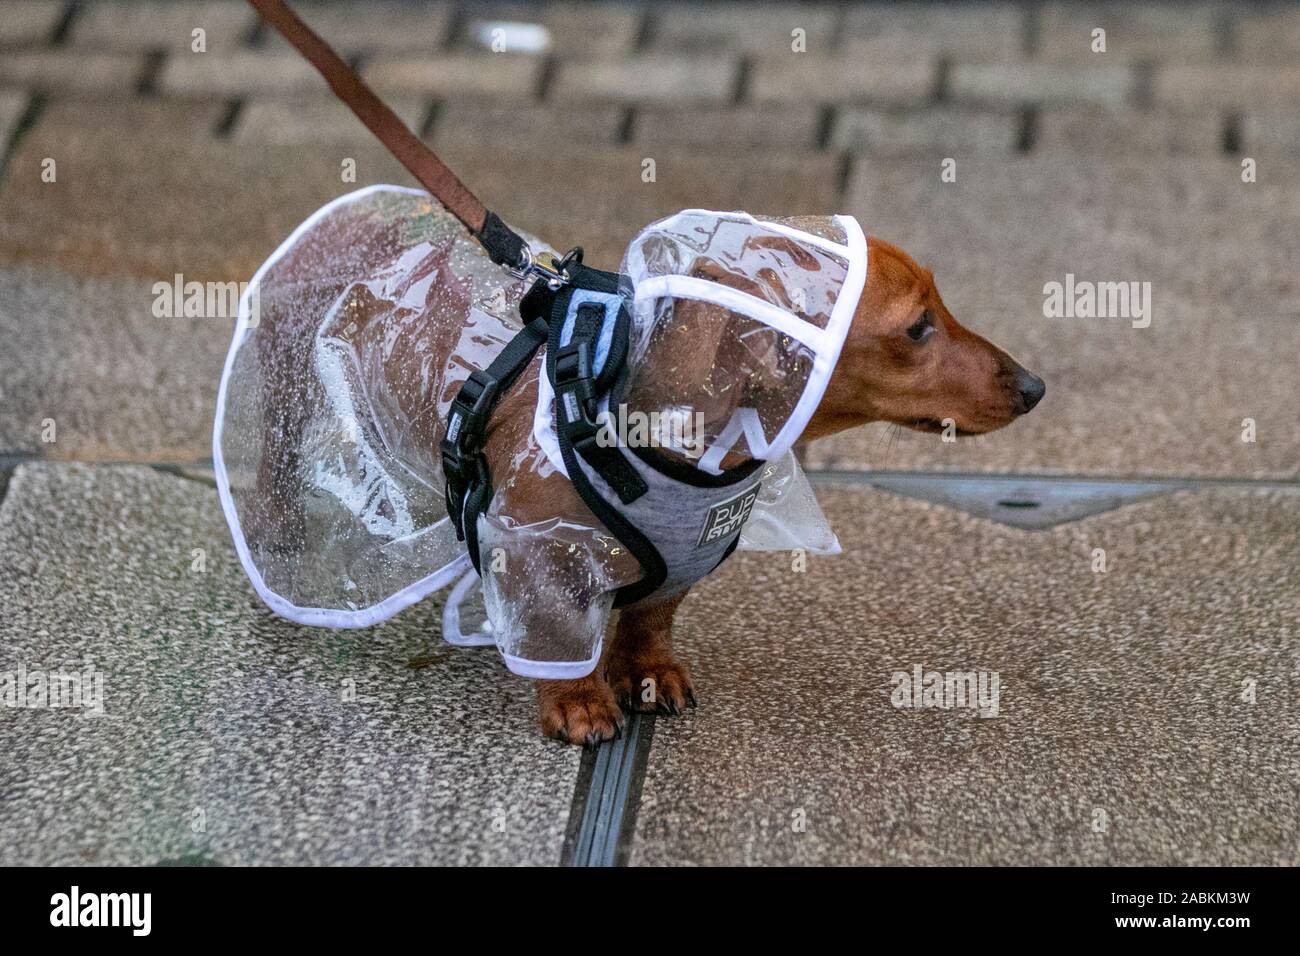 Dachshund sausage dog wearing clear plastic mac in Preston, Lancashire. Weather warnings for heavy rain puts a dampener on Black Friday sales in Preston. Dachshund sausage dog escapes the worst of the weather by wearing a clear polythene waterproof pooch coat. Stock Photo